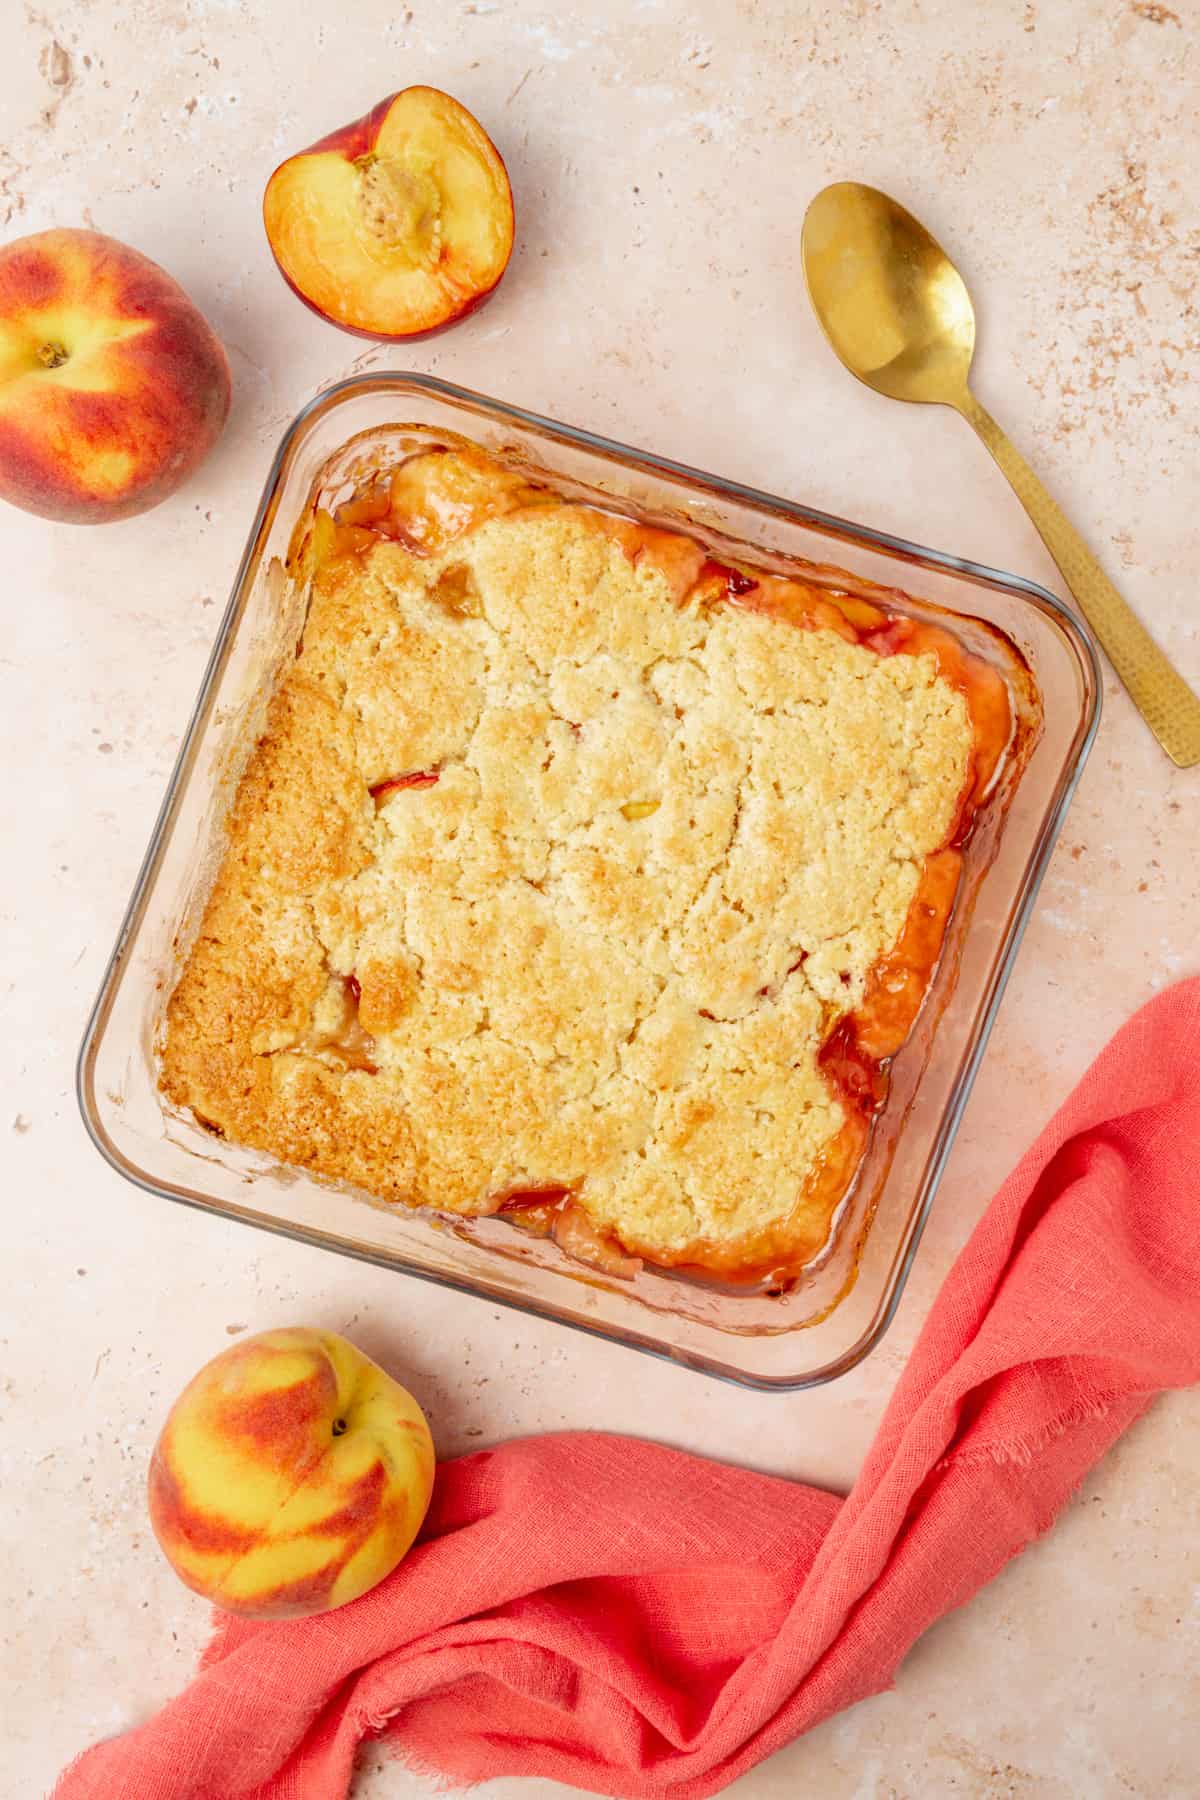 Freshly baked peach cobbler with a light golden brown topping.